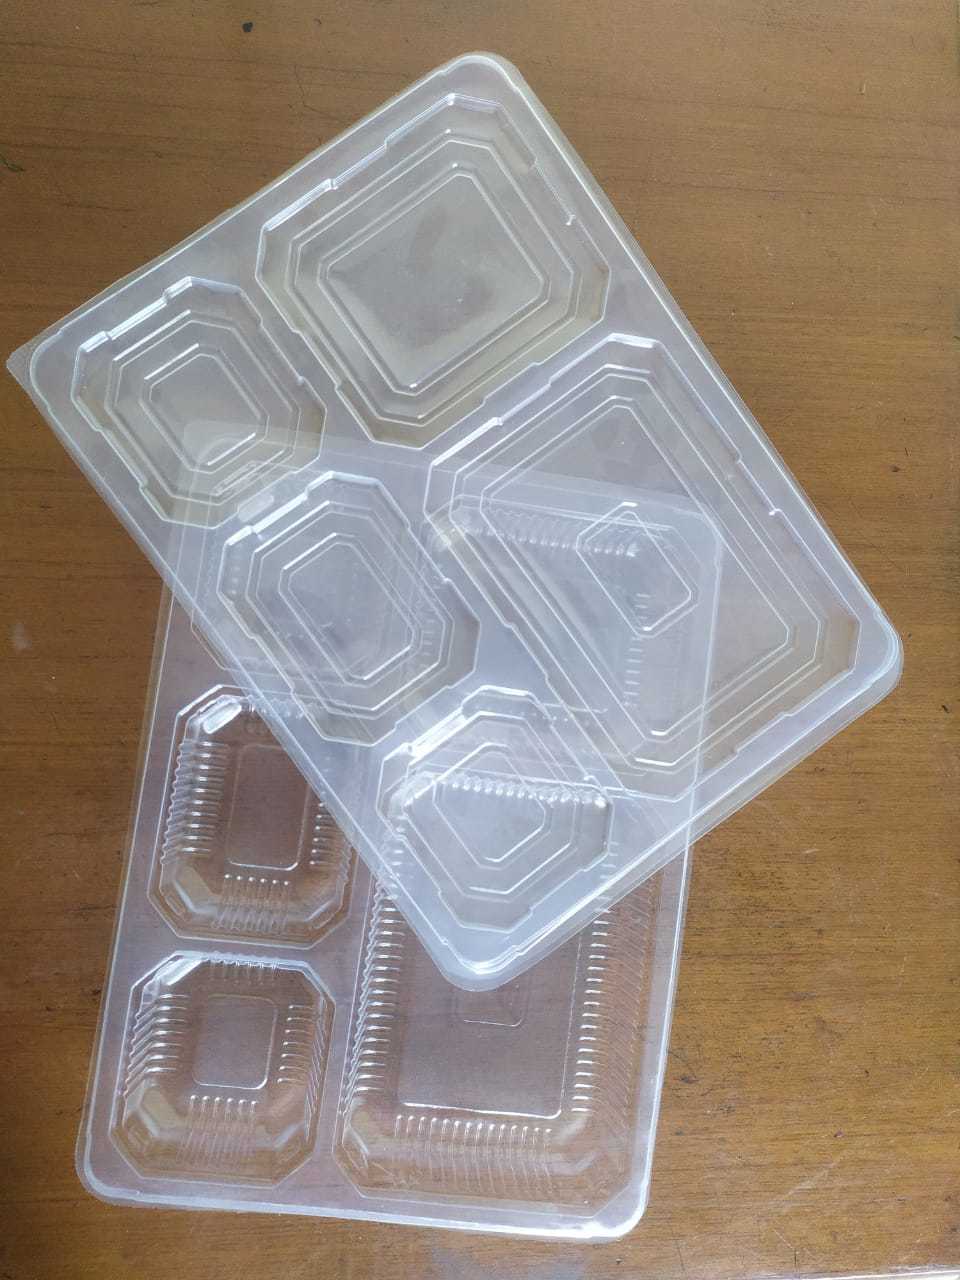 5cp Plastic Meal Tray